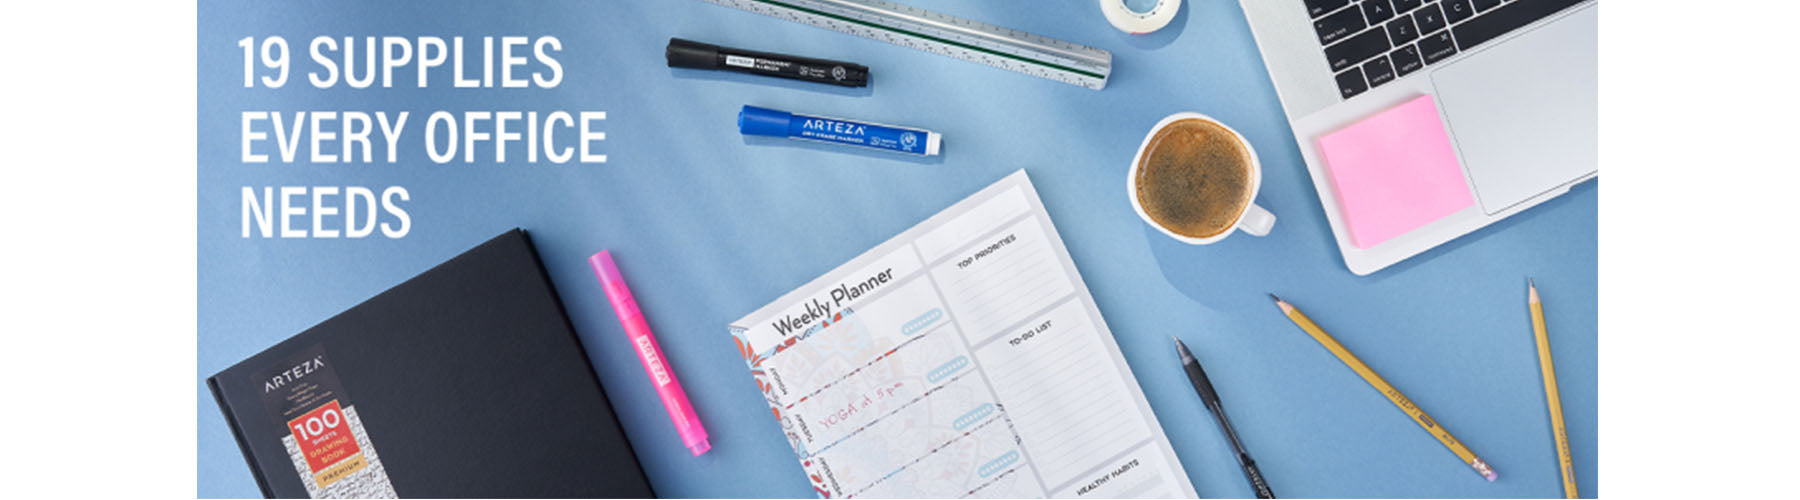 Be More Productive with These 19 Office Supplies